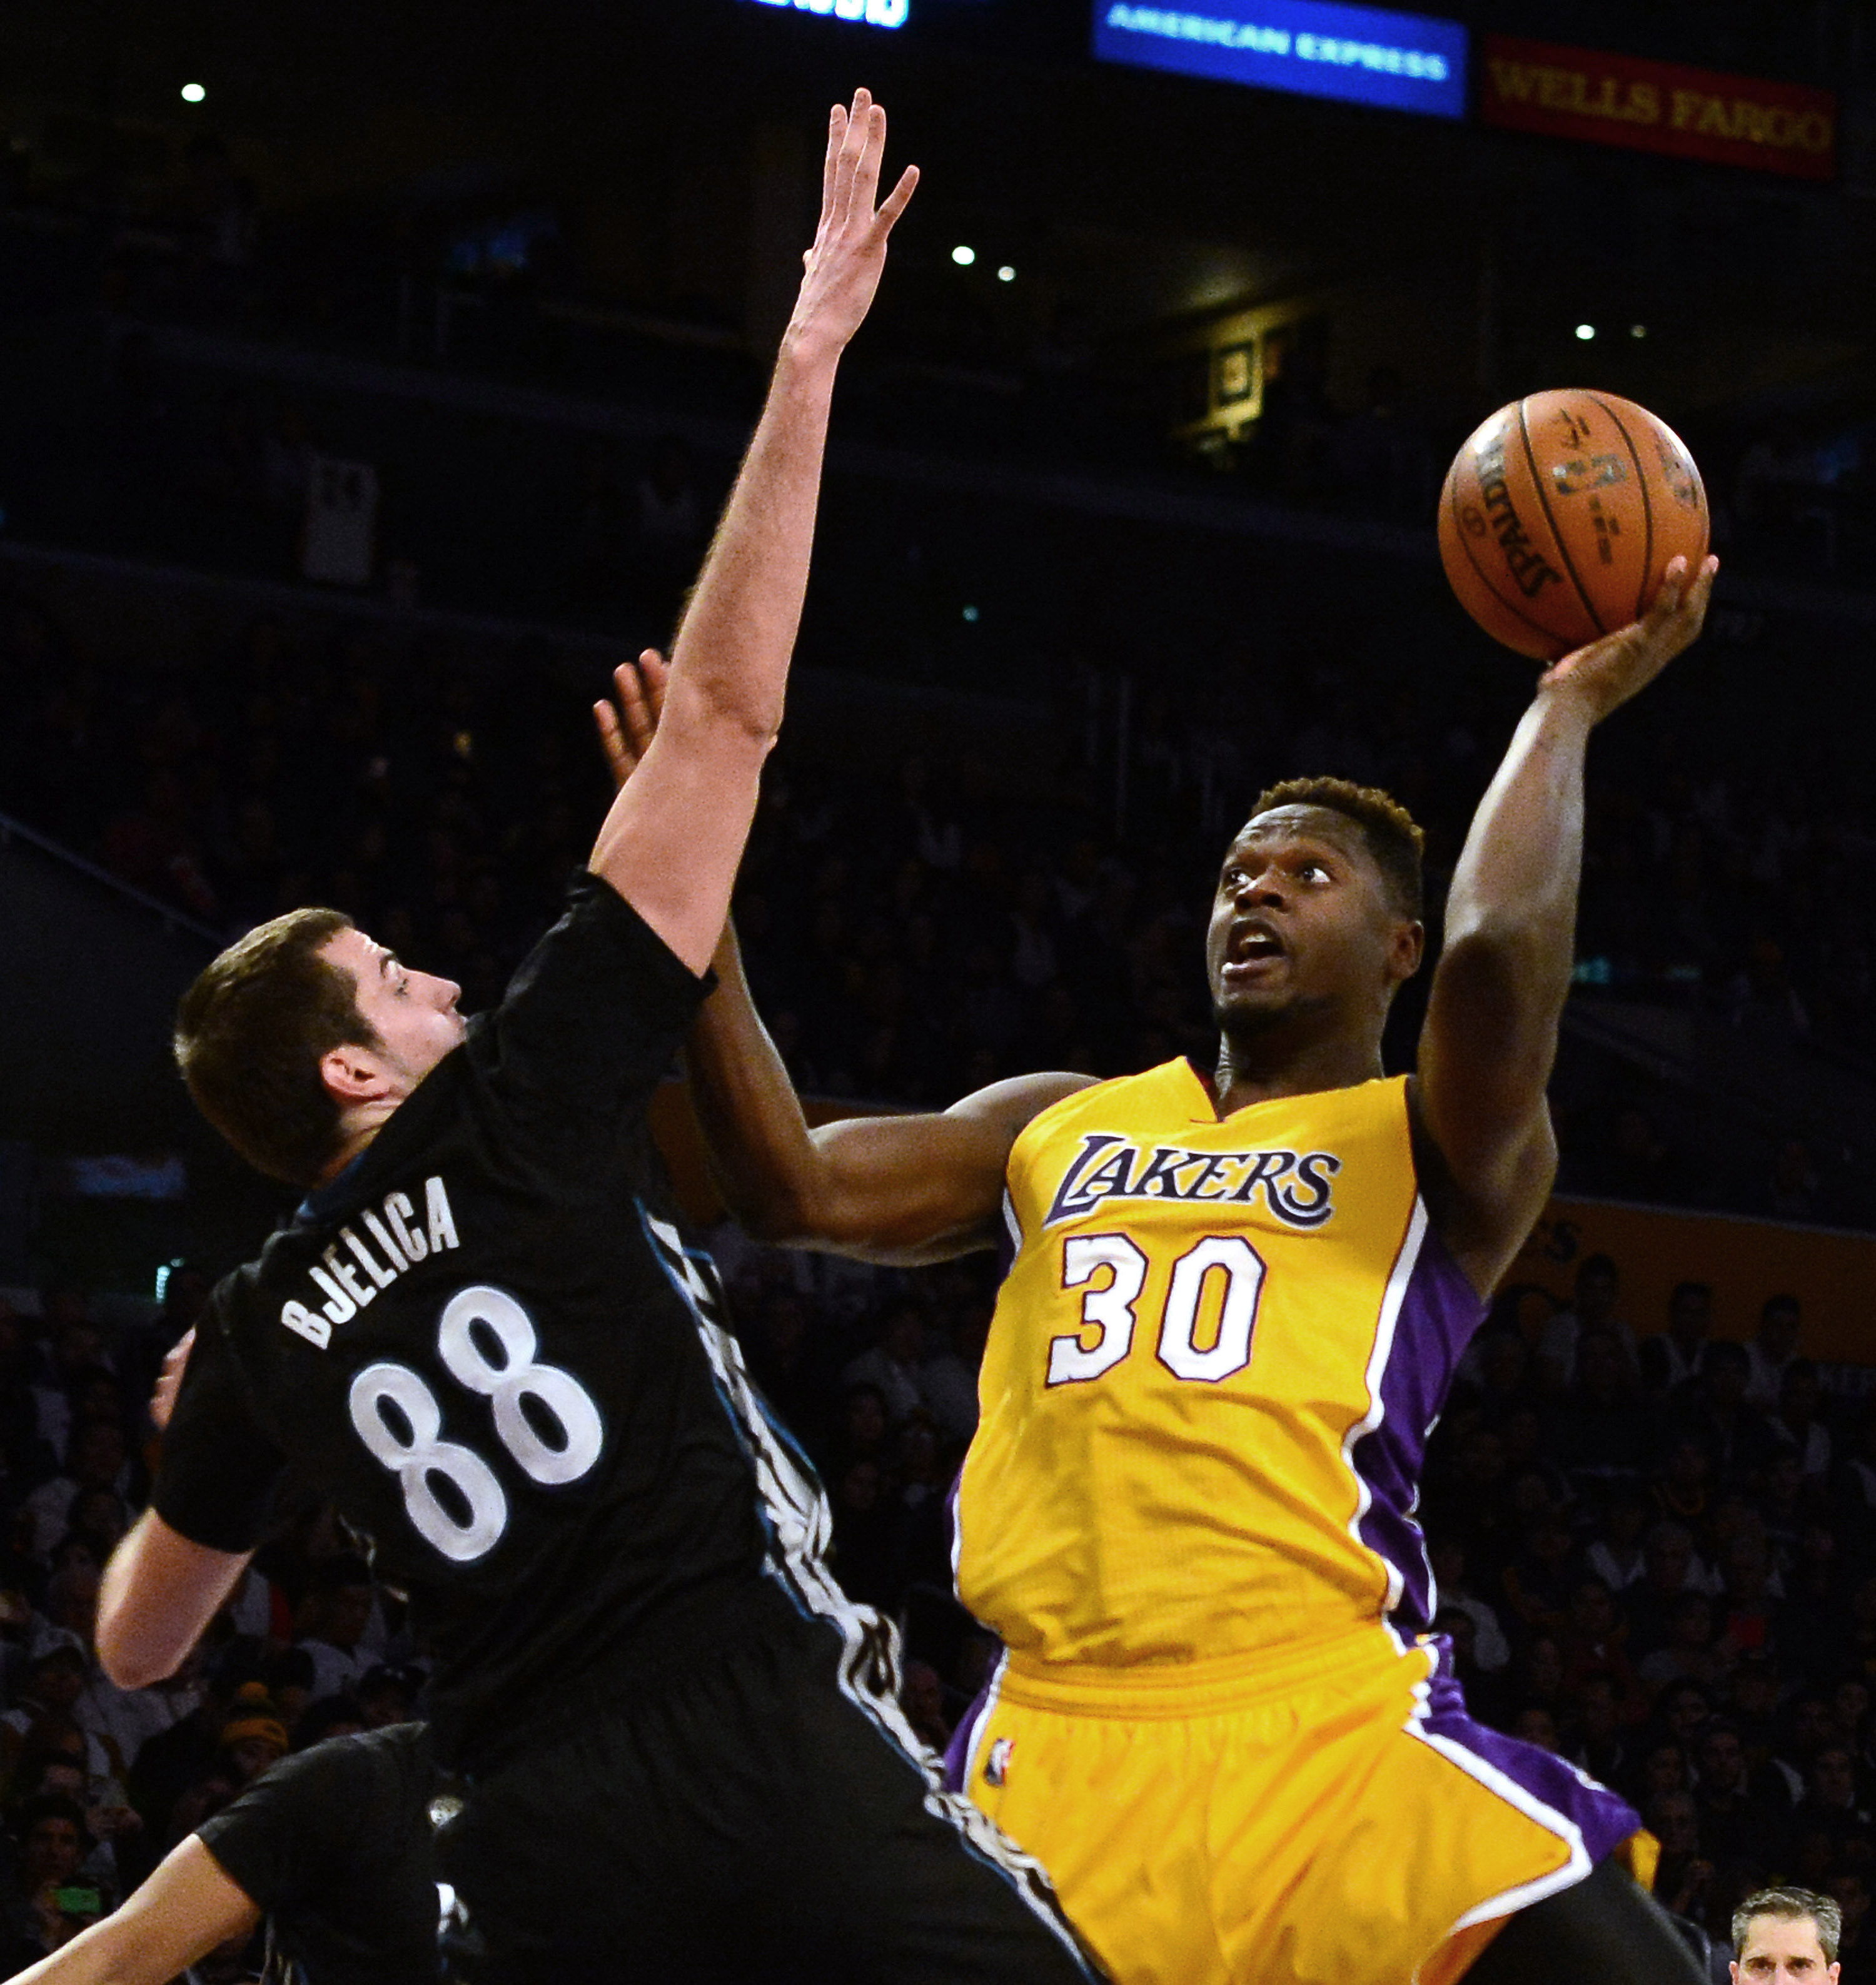 Los Angeles Lakers forward Julius Randle (30) shoots over Minnesota Timberwolves forward Nemanja Bjelica (88) in the first half of a NBA basketball game at Staples Center on Tuesday, Feb. 2, 2015 in Los Angeles.   (Photo by Keith Birmingham/ Pasadena Star-News)